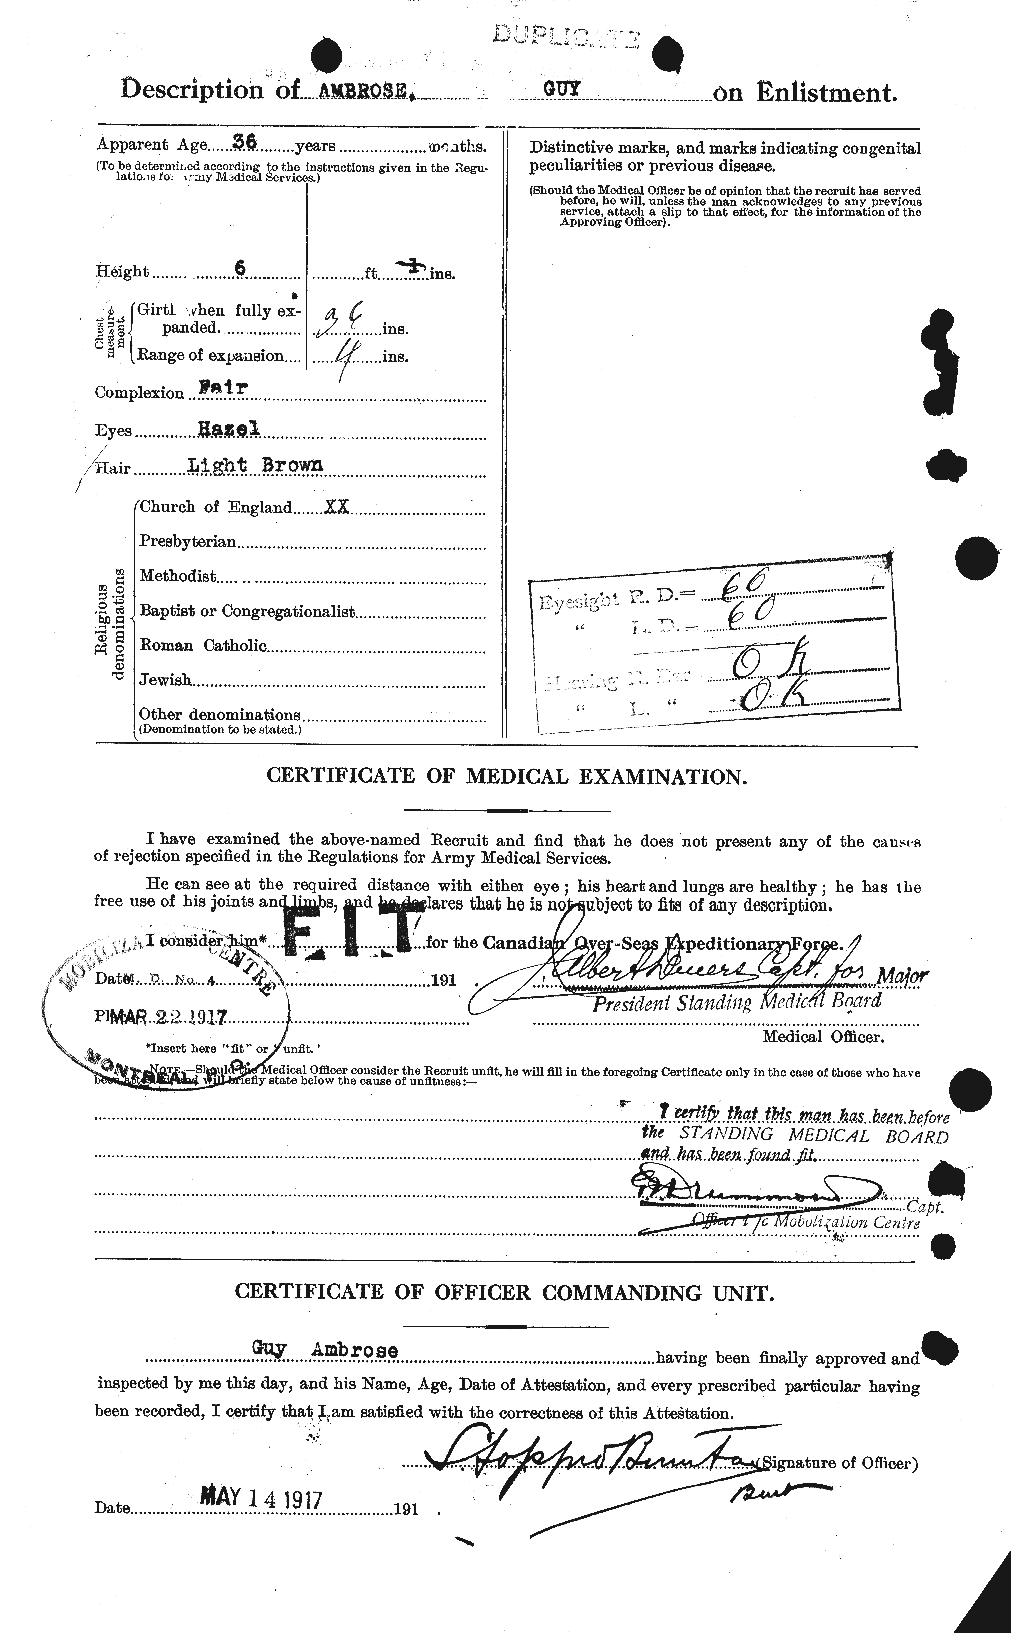 Personnel Records of the First World War - CEF 208935b